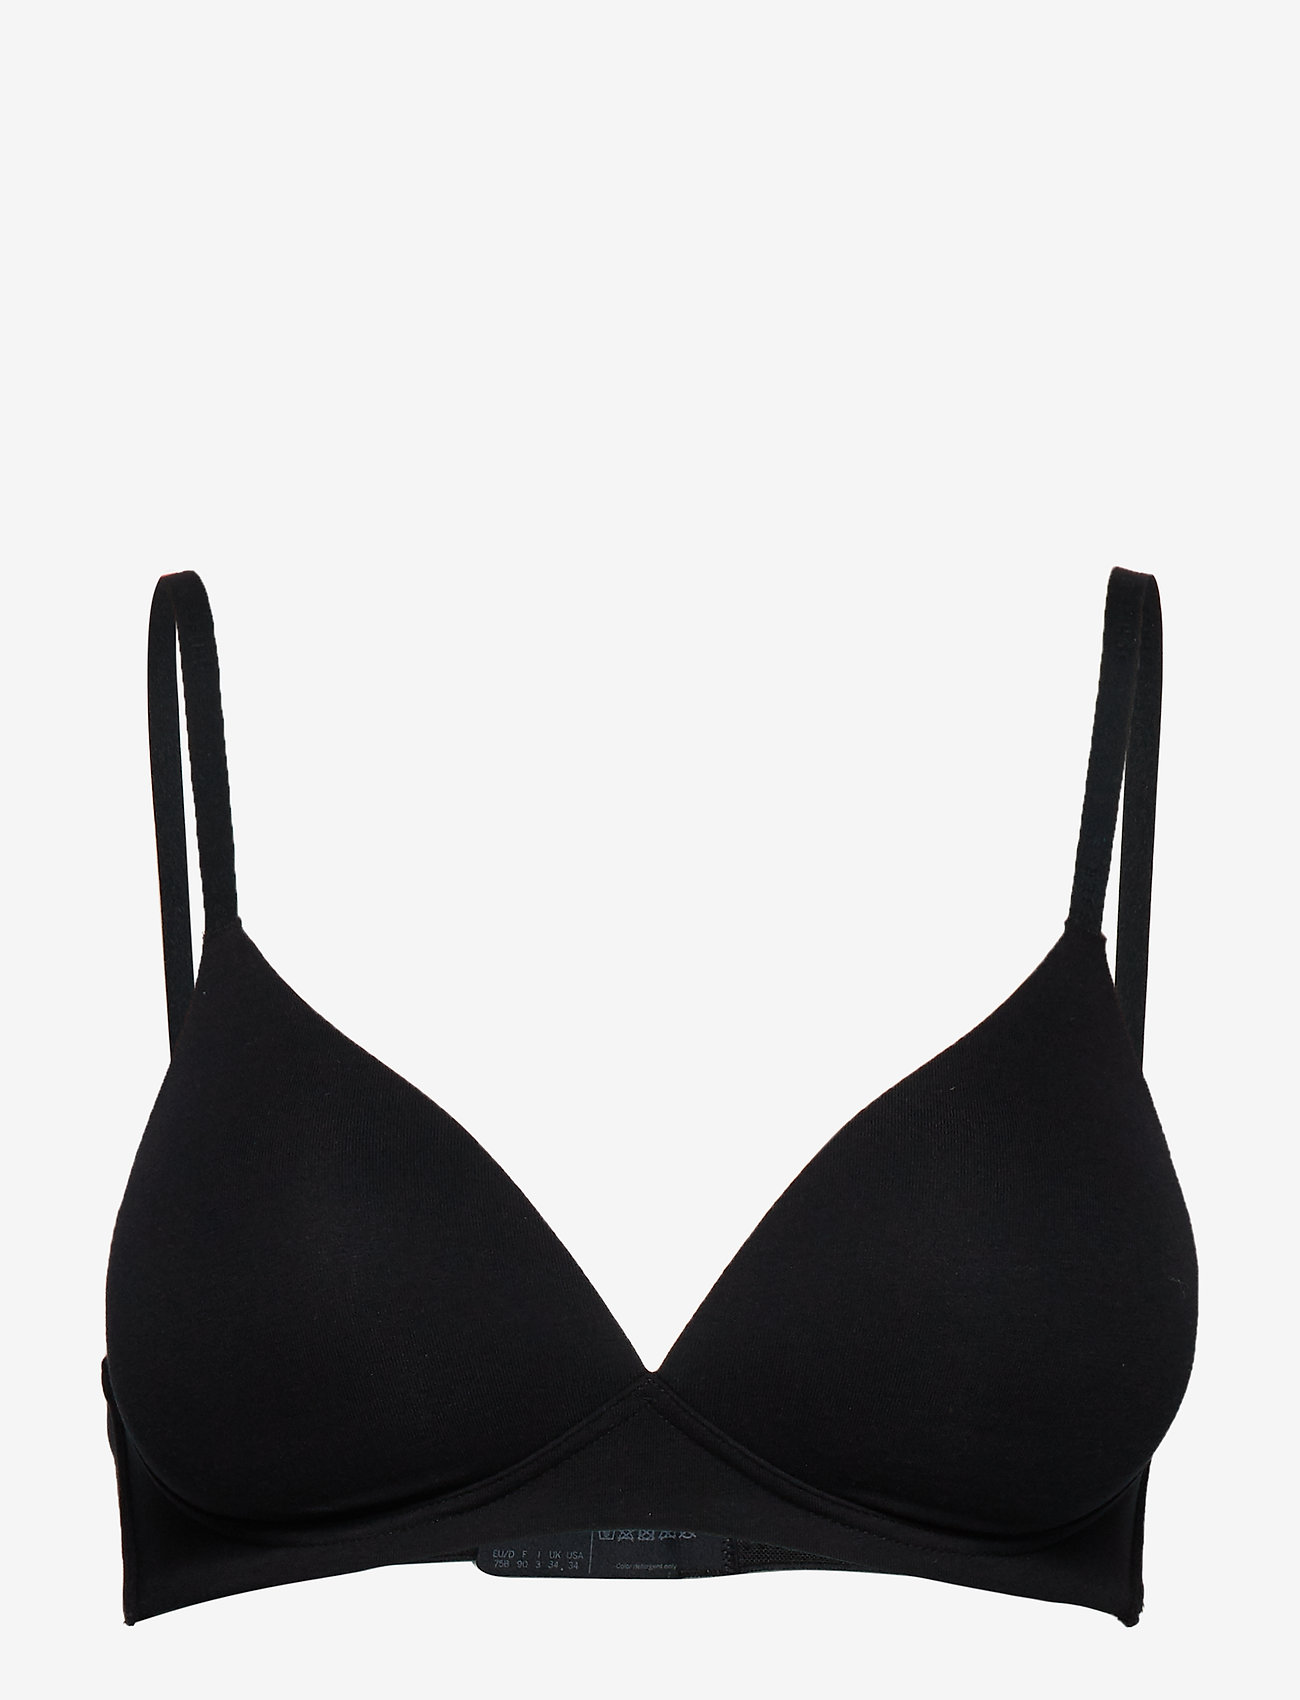 Bra With Soft Cup (Black) (27.96 